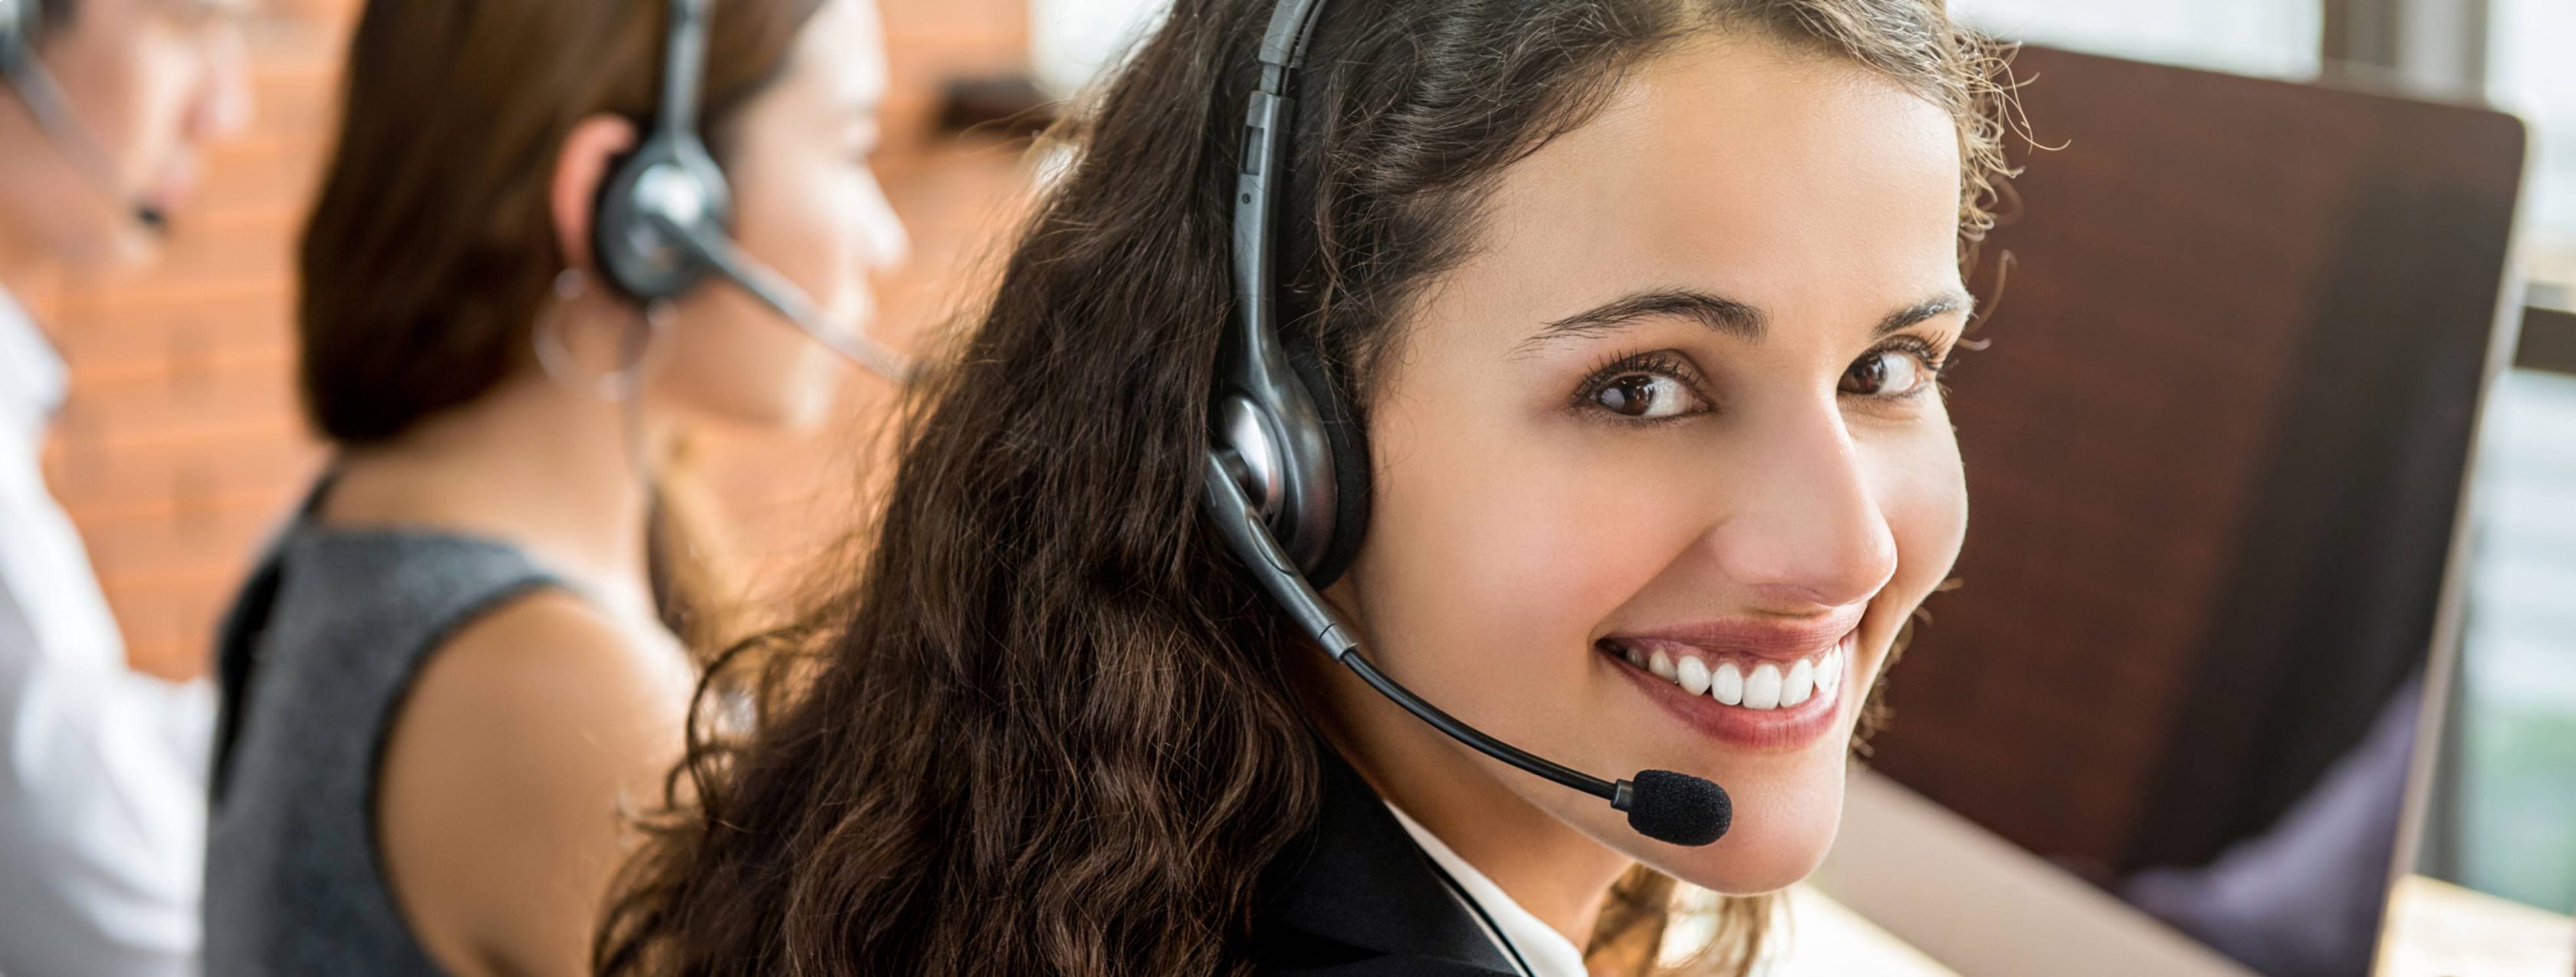 Smiling female telemarketing customer service agent working in call center.